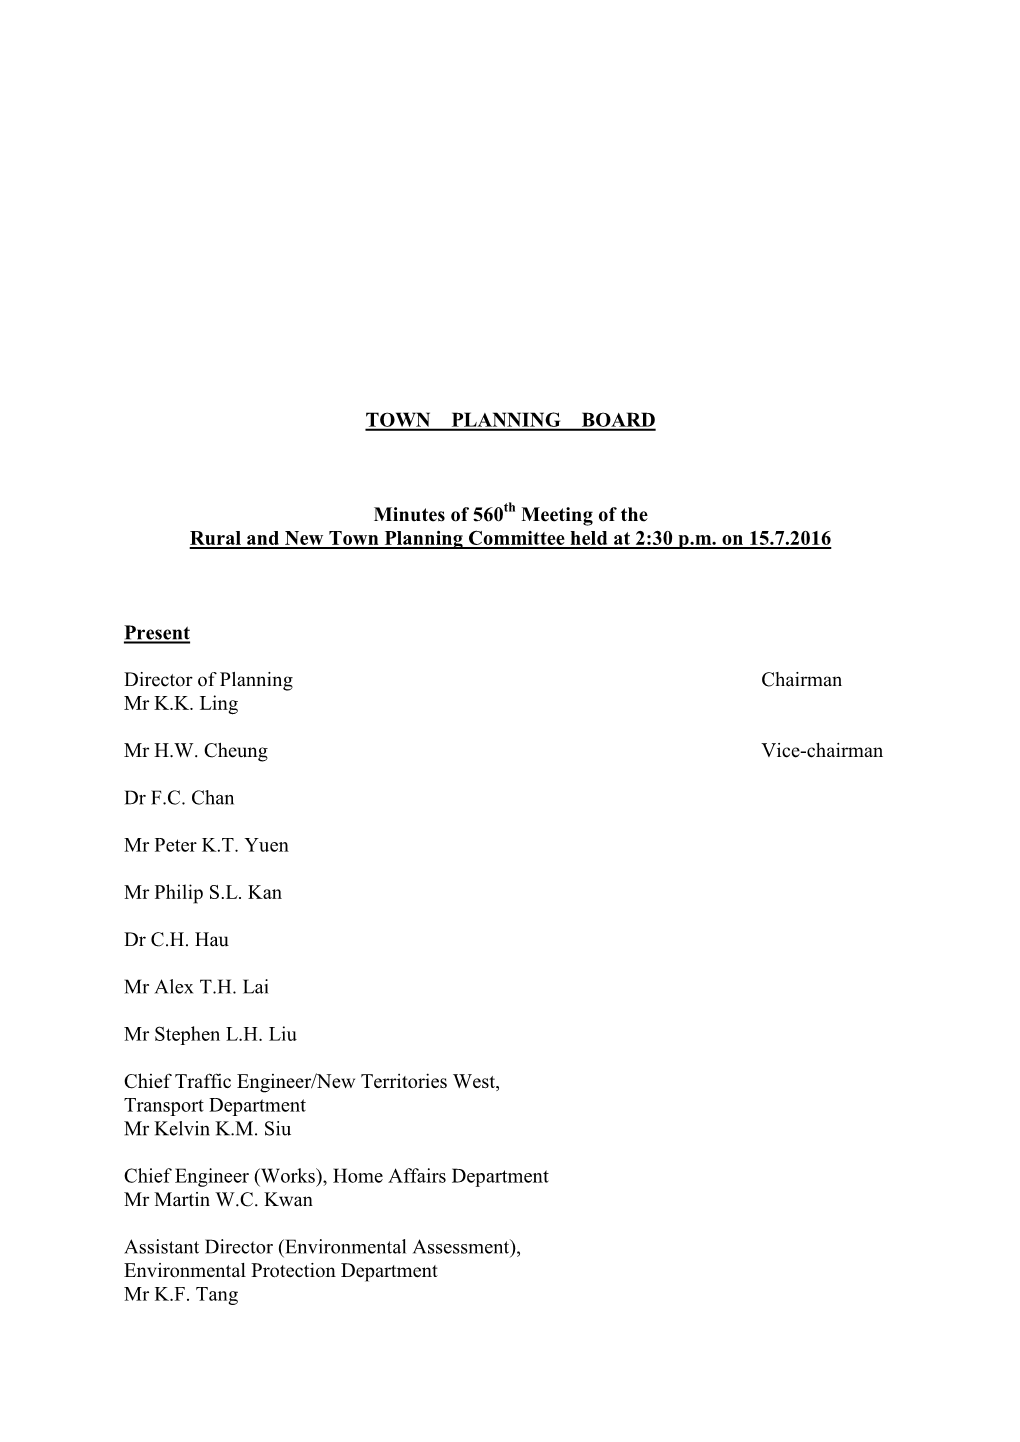 TOWN PLANNING BOARD Minutes of 560 Meeting of the Rural and New